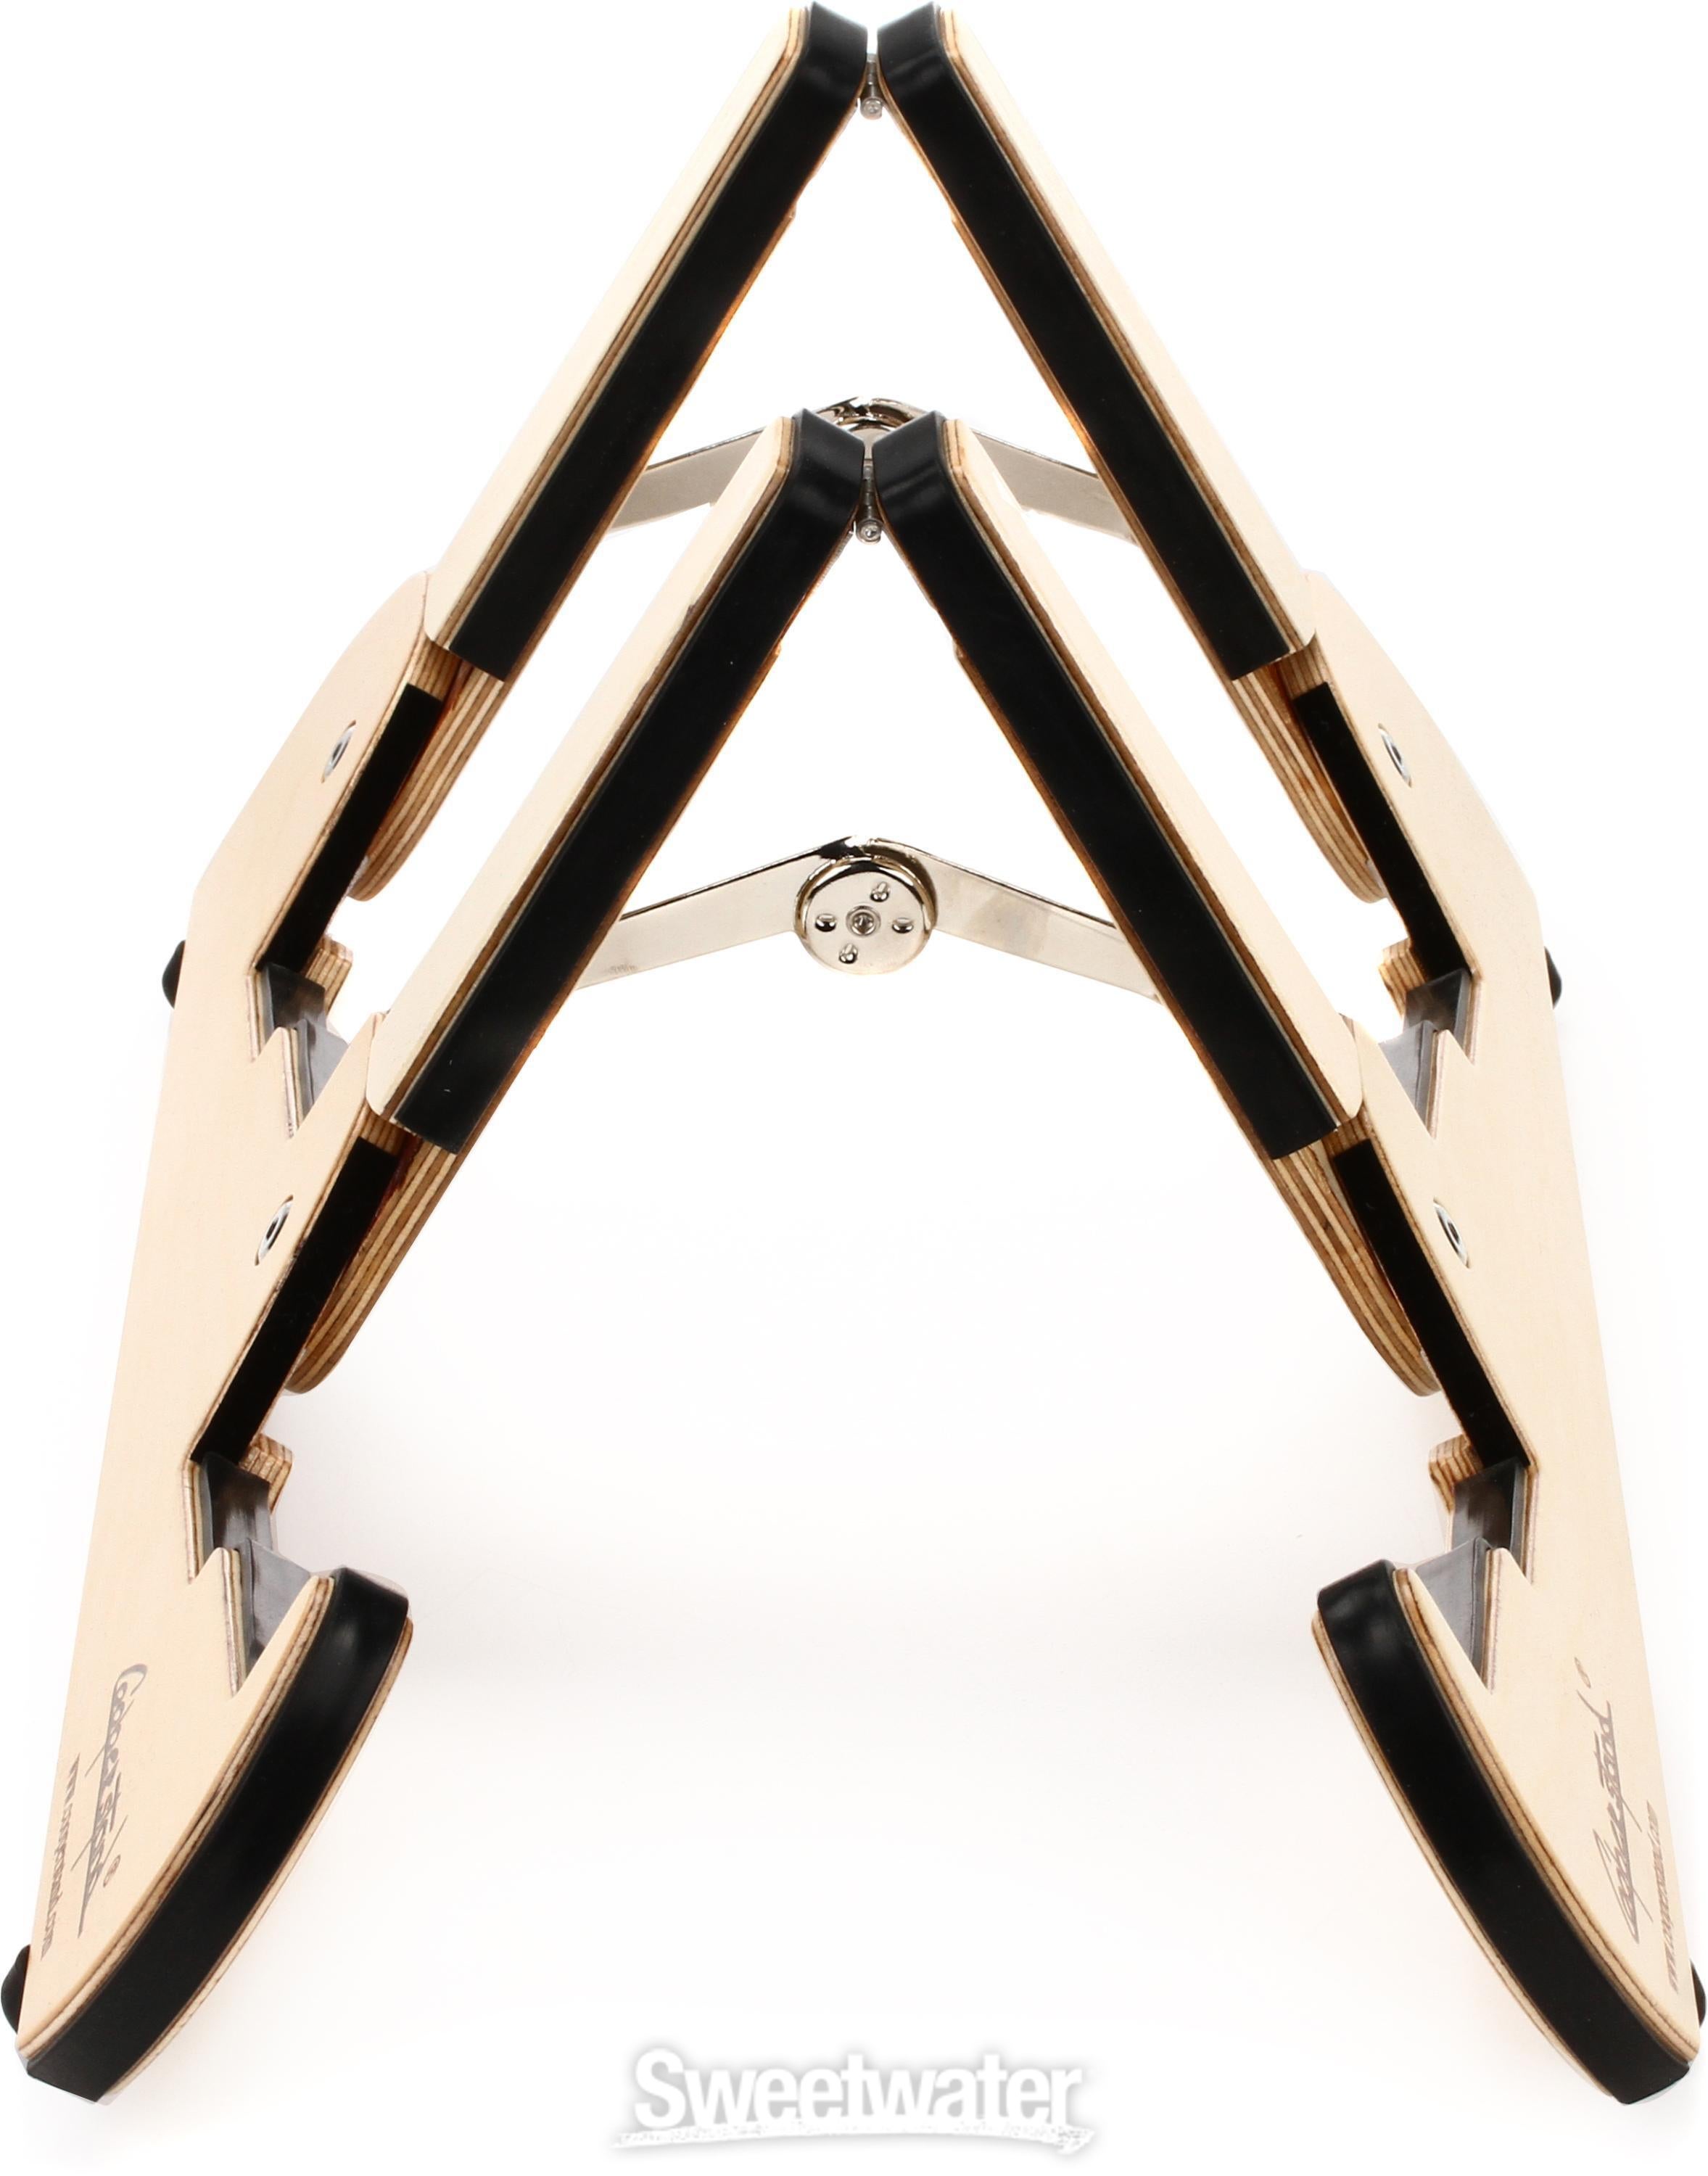 Cooperstand Pro-Tandem Double Guitar Stand - Birch | Sweetwater